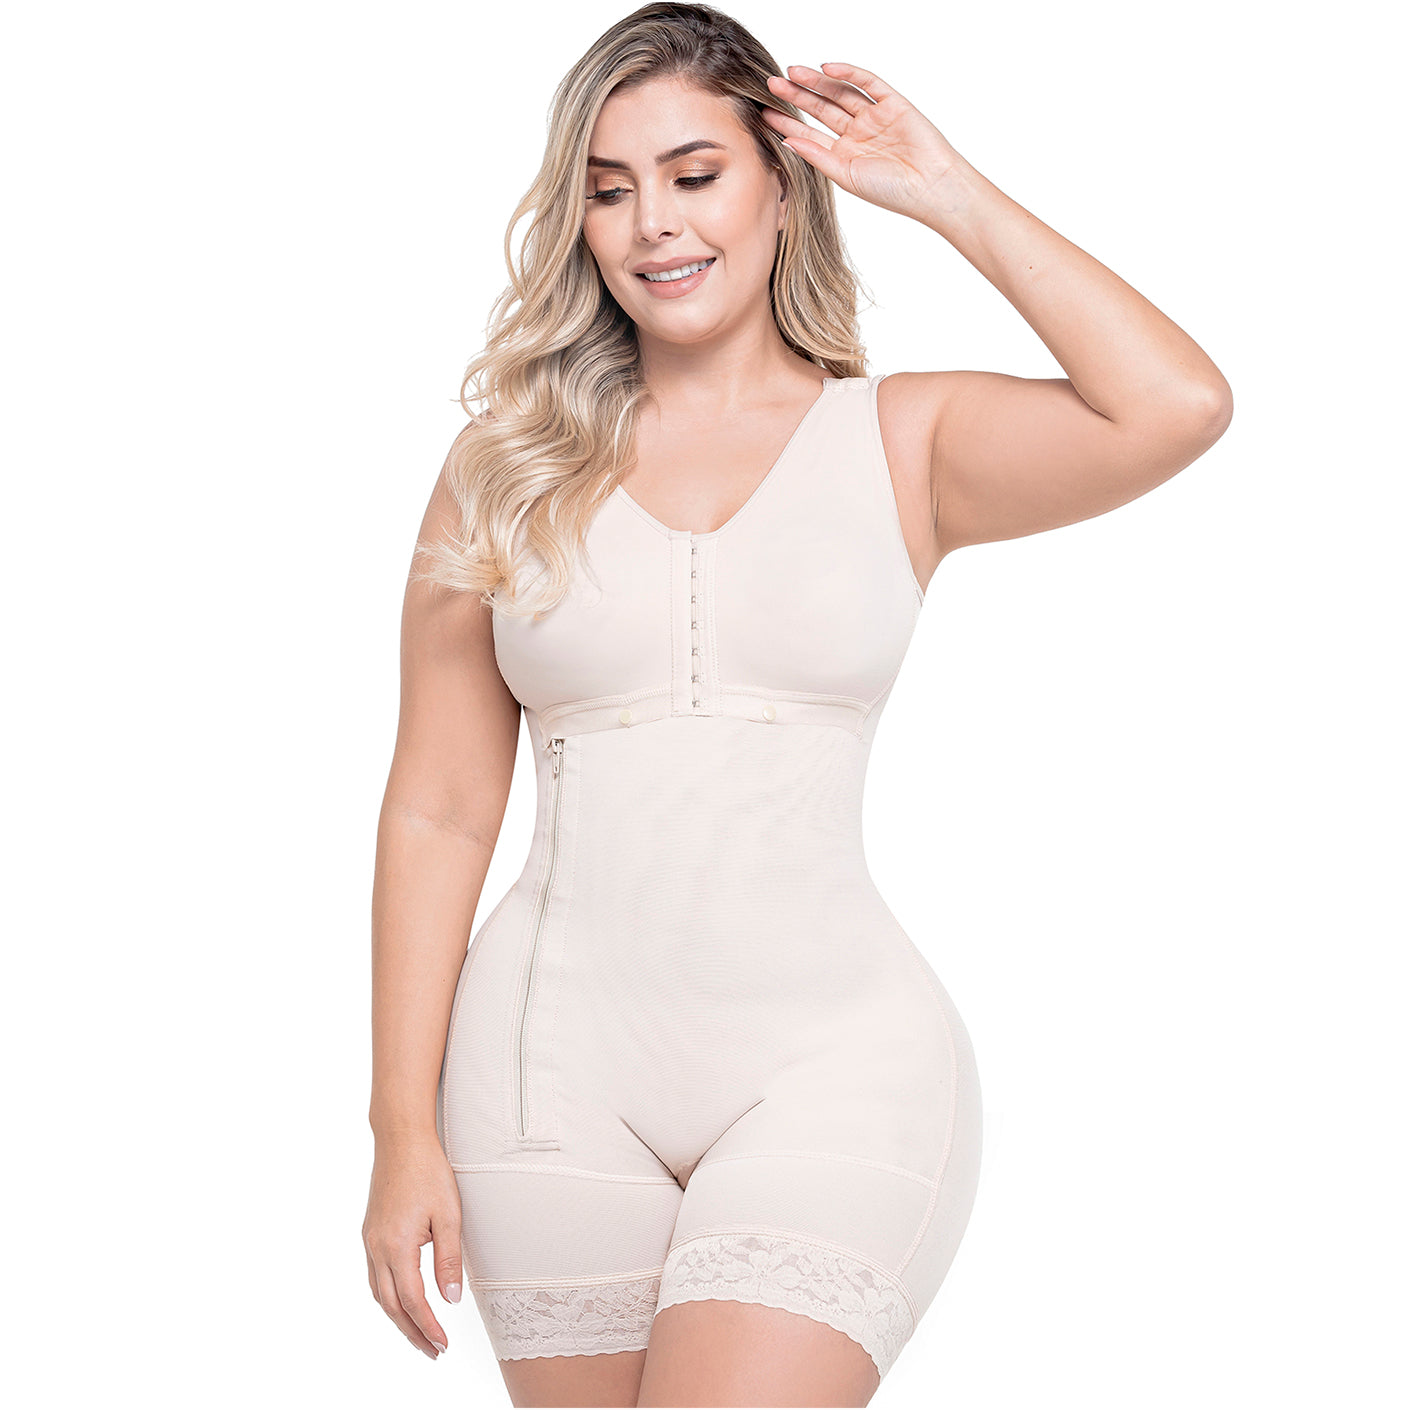 Hot Fajas Colombianas Womens Seamless Thigh Slimmer Open Bust Shapewear  Firm Control Bodysuit Full Body Shaper Plus Size From 17,19 €